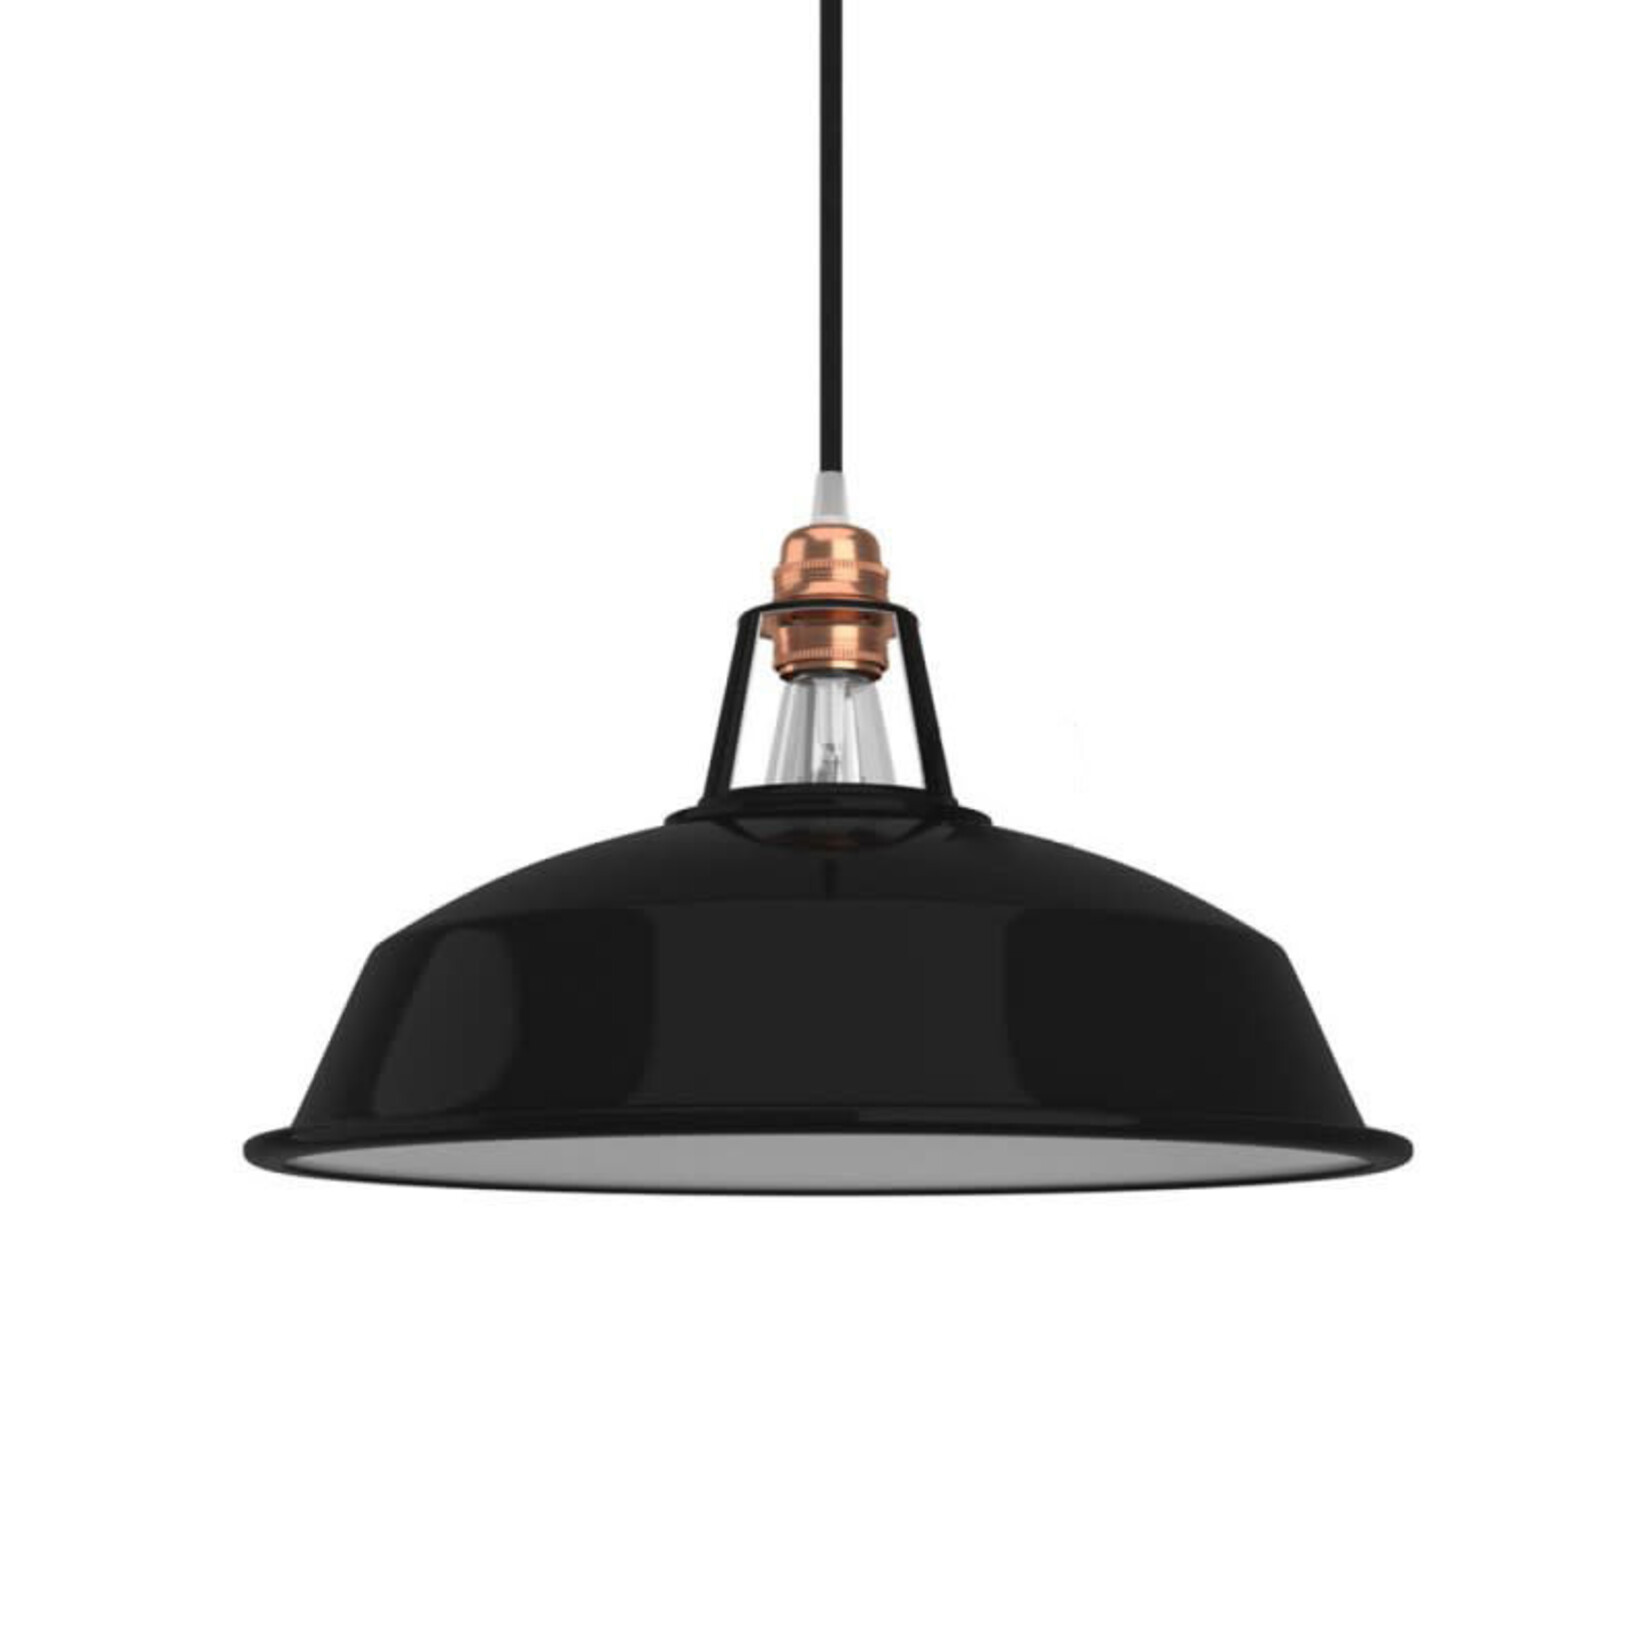 CCIT Black Harbour lampshade in polished metal for E27 fitting, 30 cm diameter shade